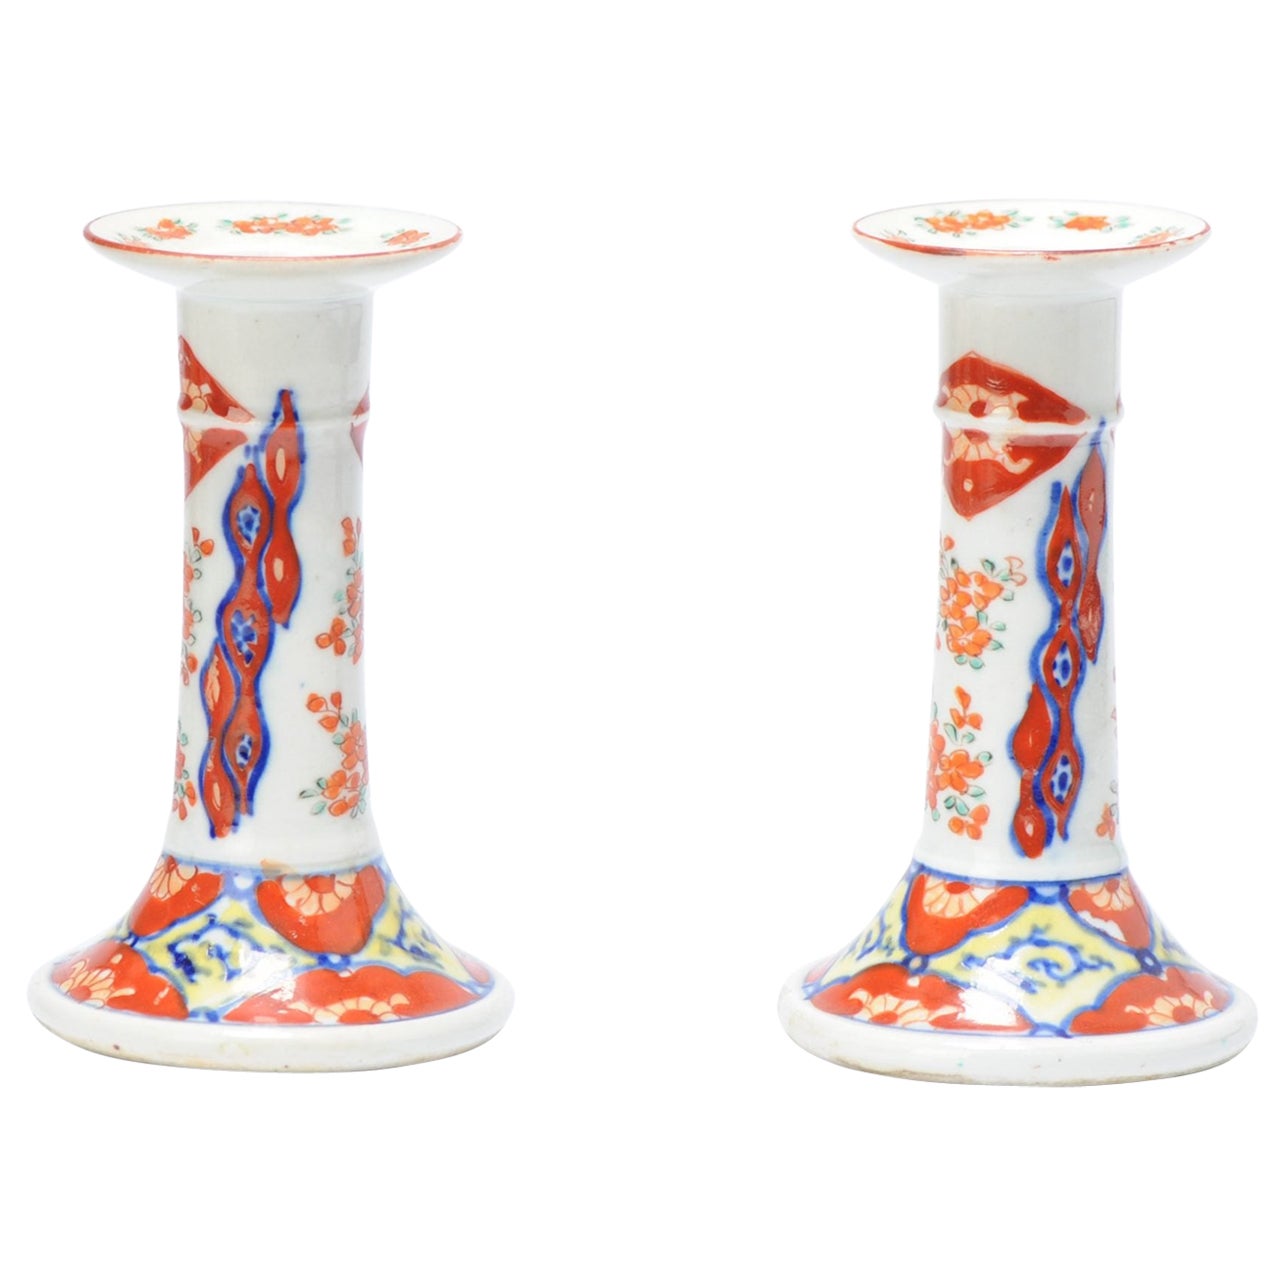 Antique Japanese Porcelain Candle Sticks Edo or Meiji Period, 19th Century For Sale